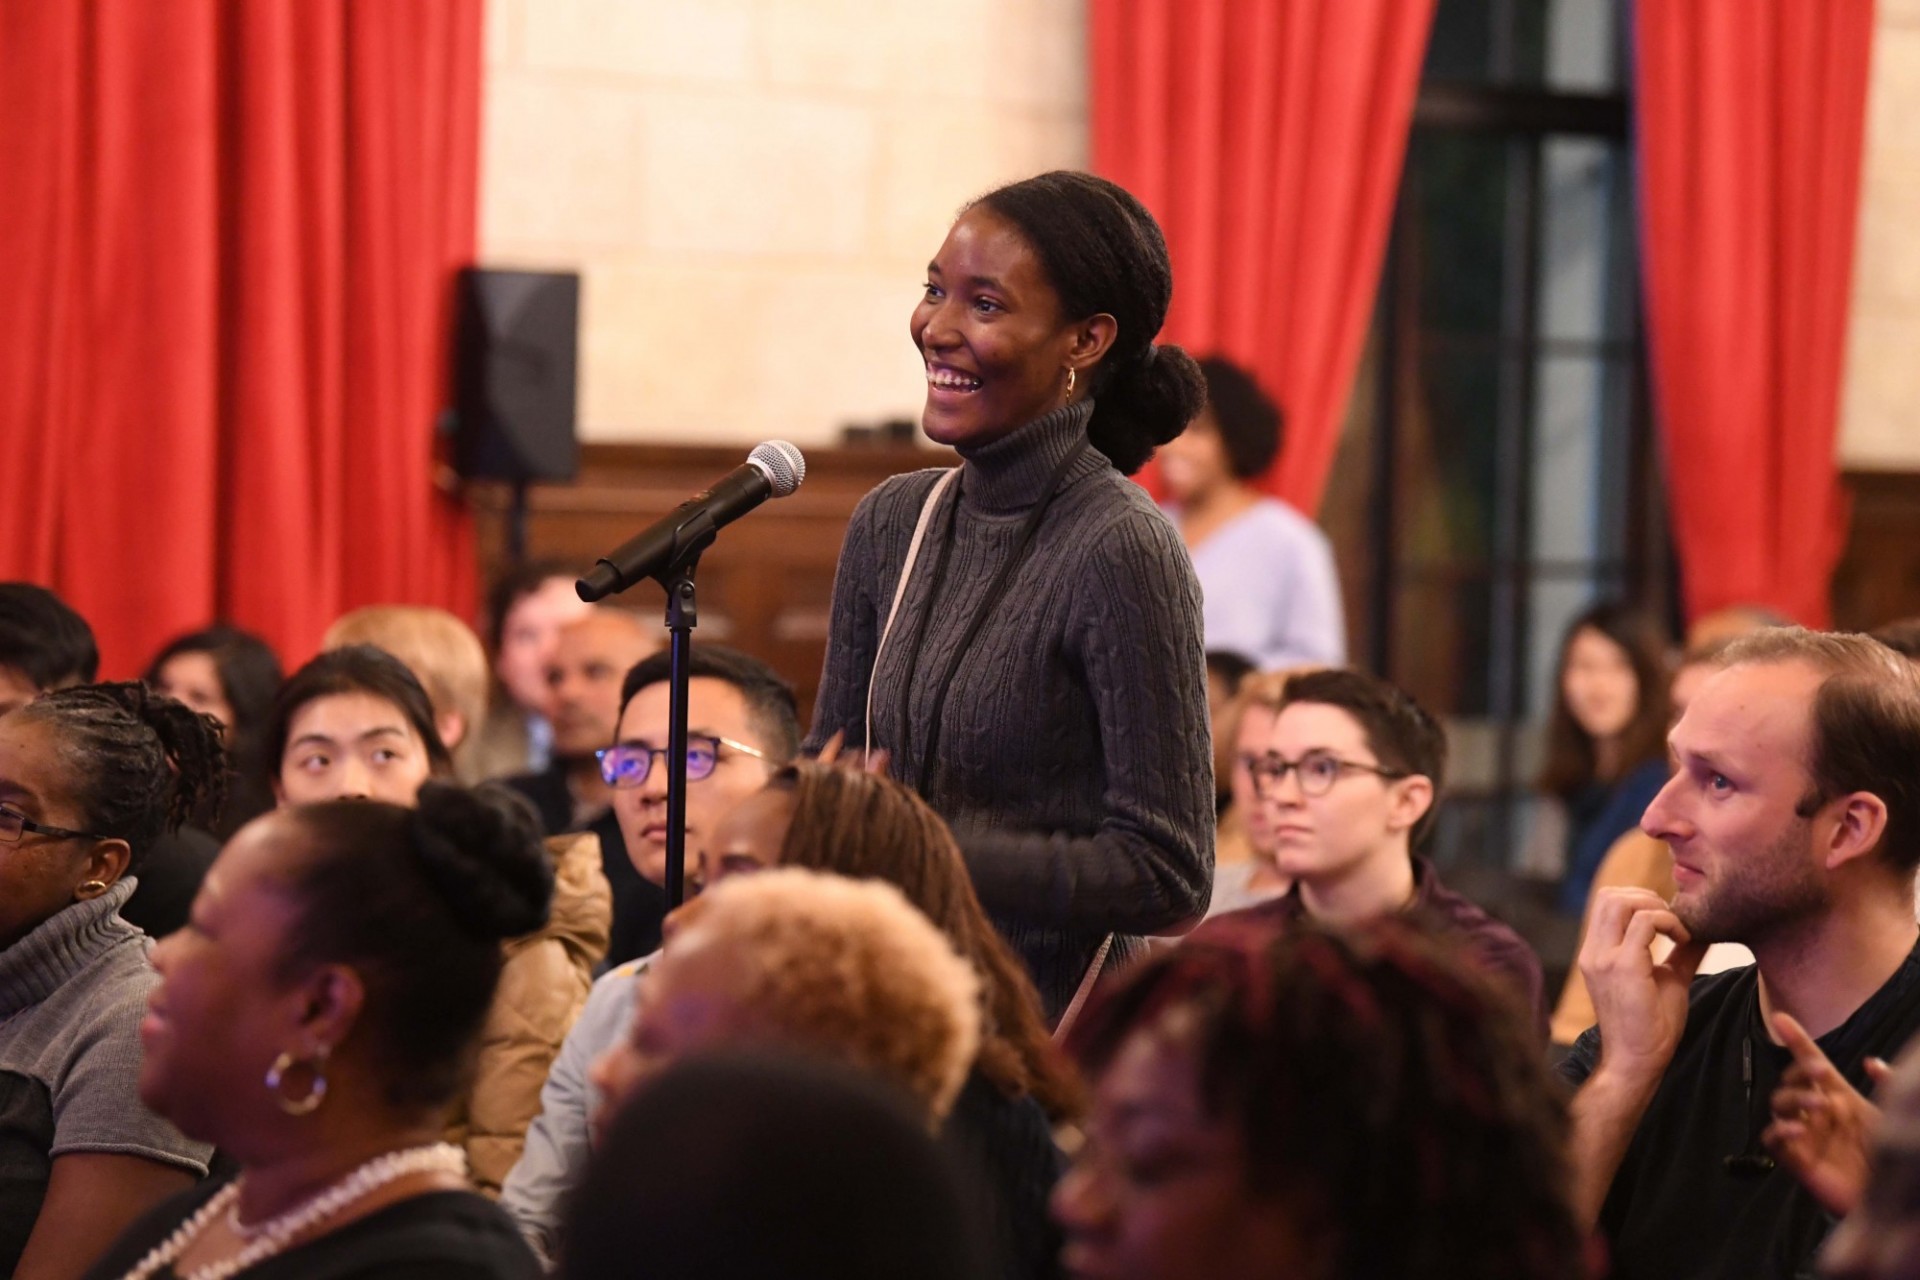 Columbia University students line up to ask President Paula-Mae Weekes of the Republic of Trinidad and Tobago questions during the question and answer session.